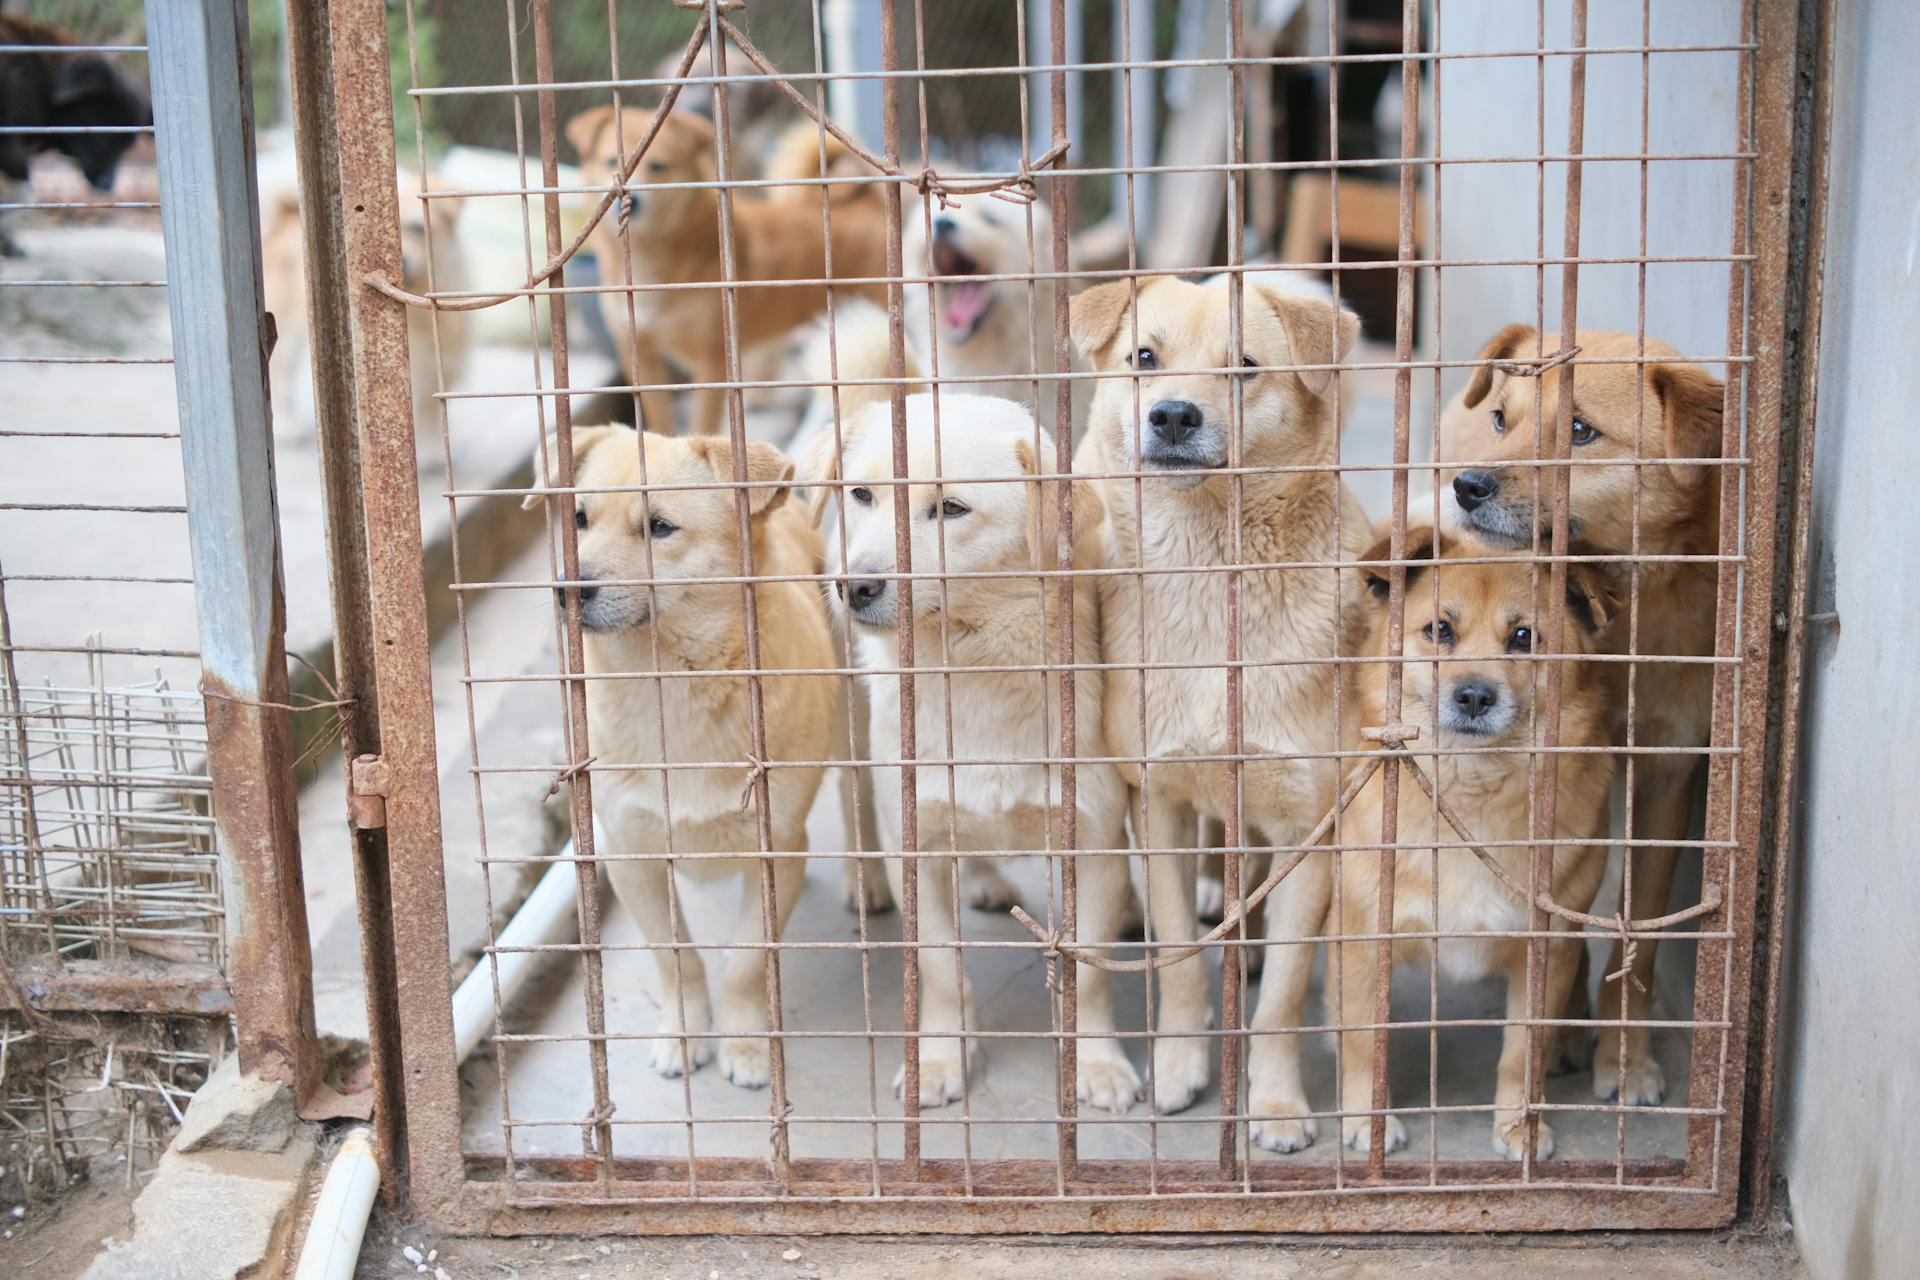 Dogs at an animal shelter | Source: Pexels